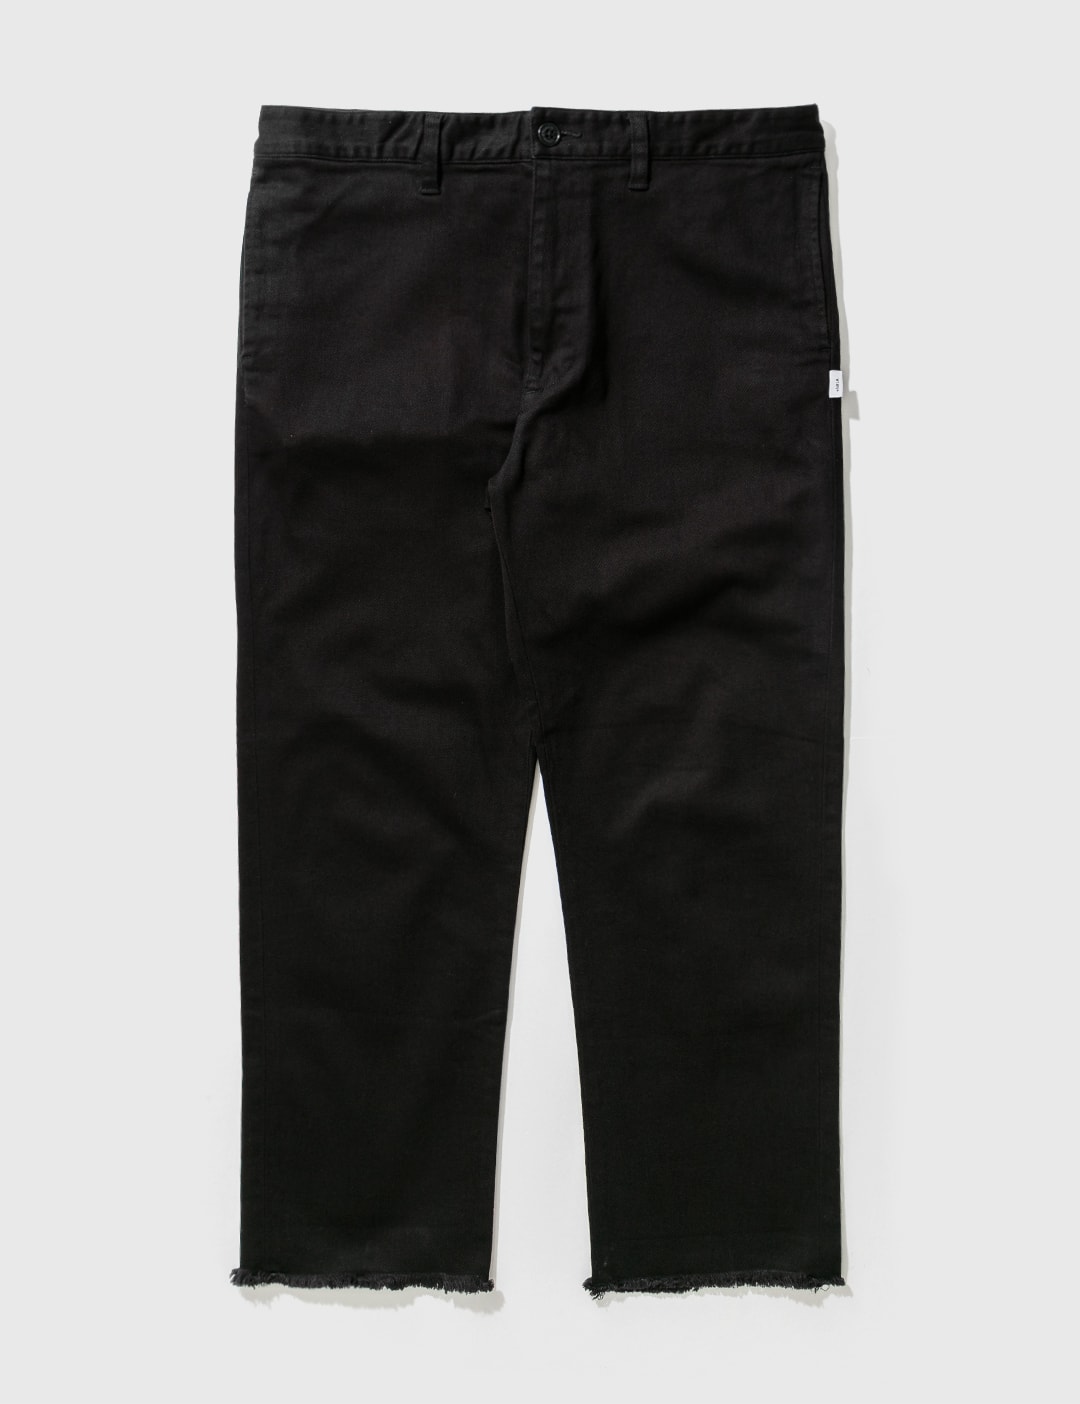 WTAPS Long jeans Placeholder Image